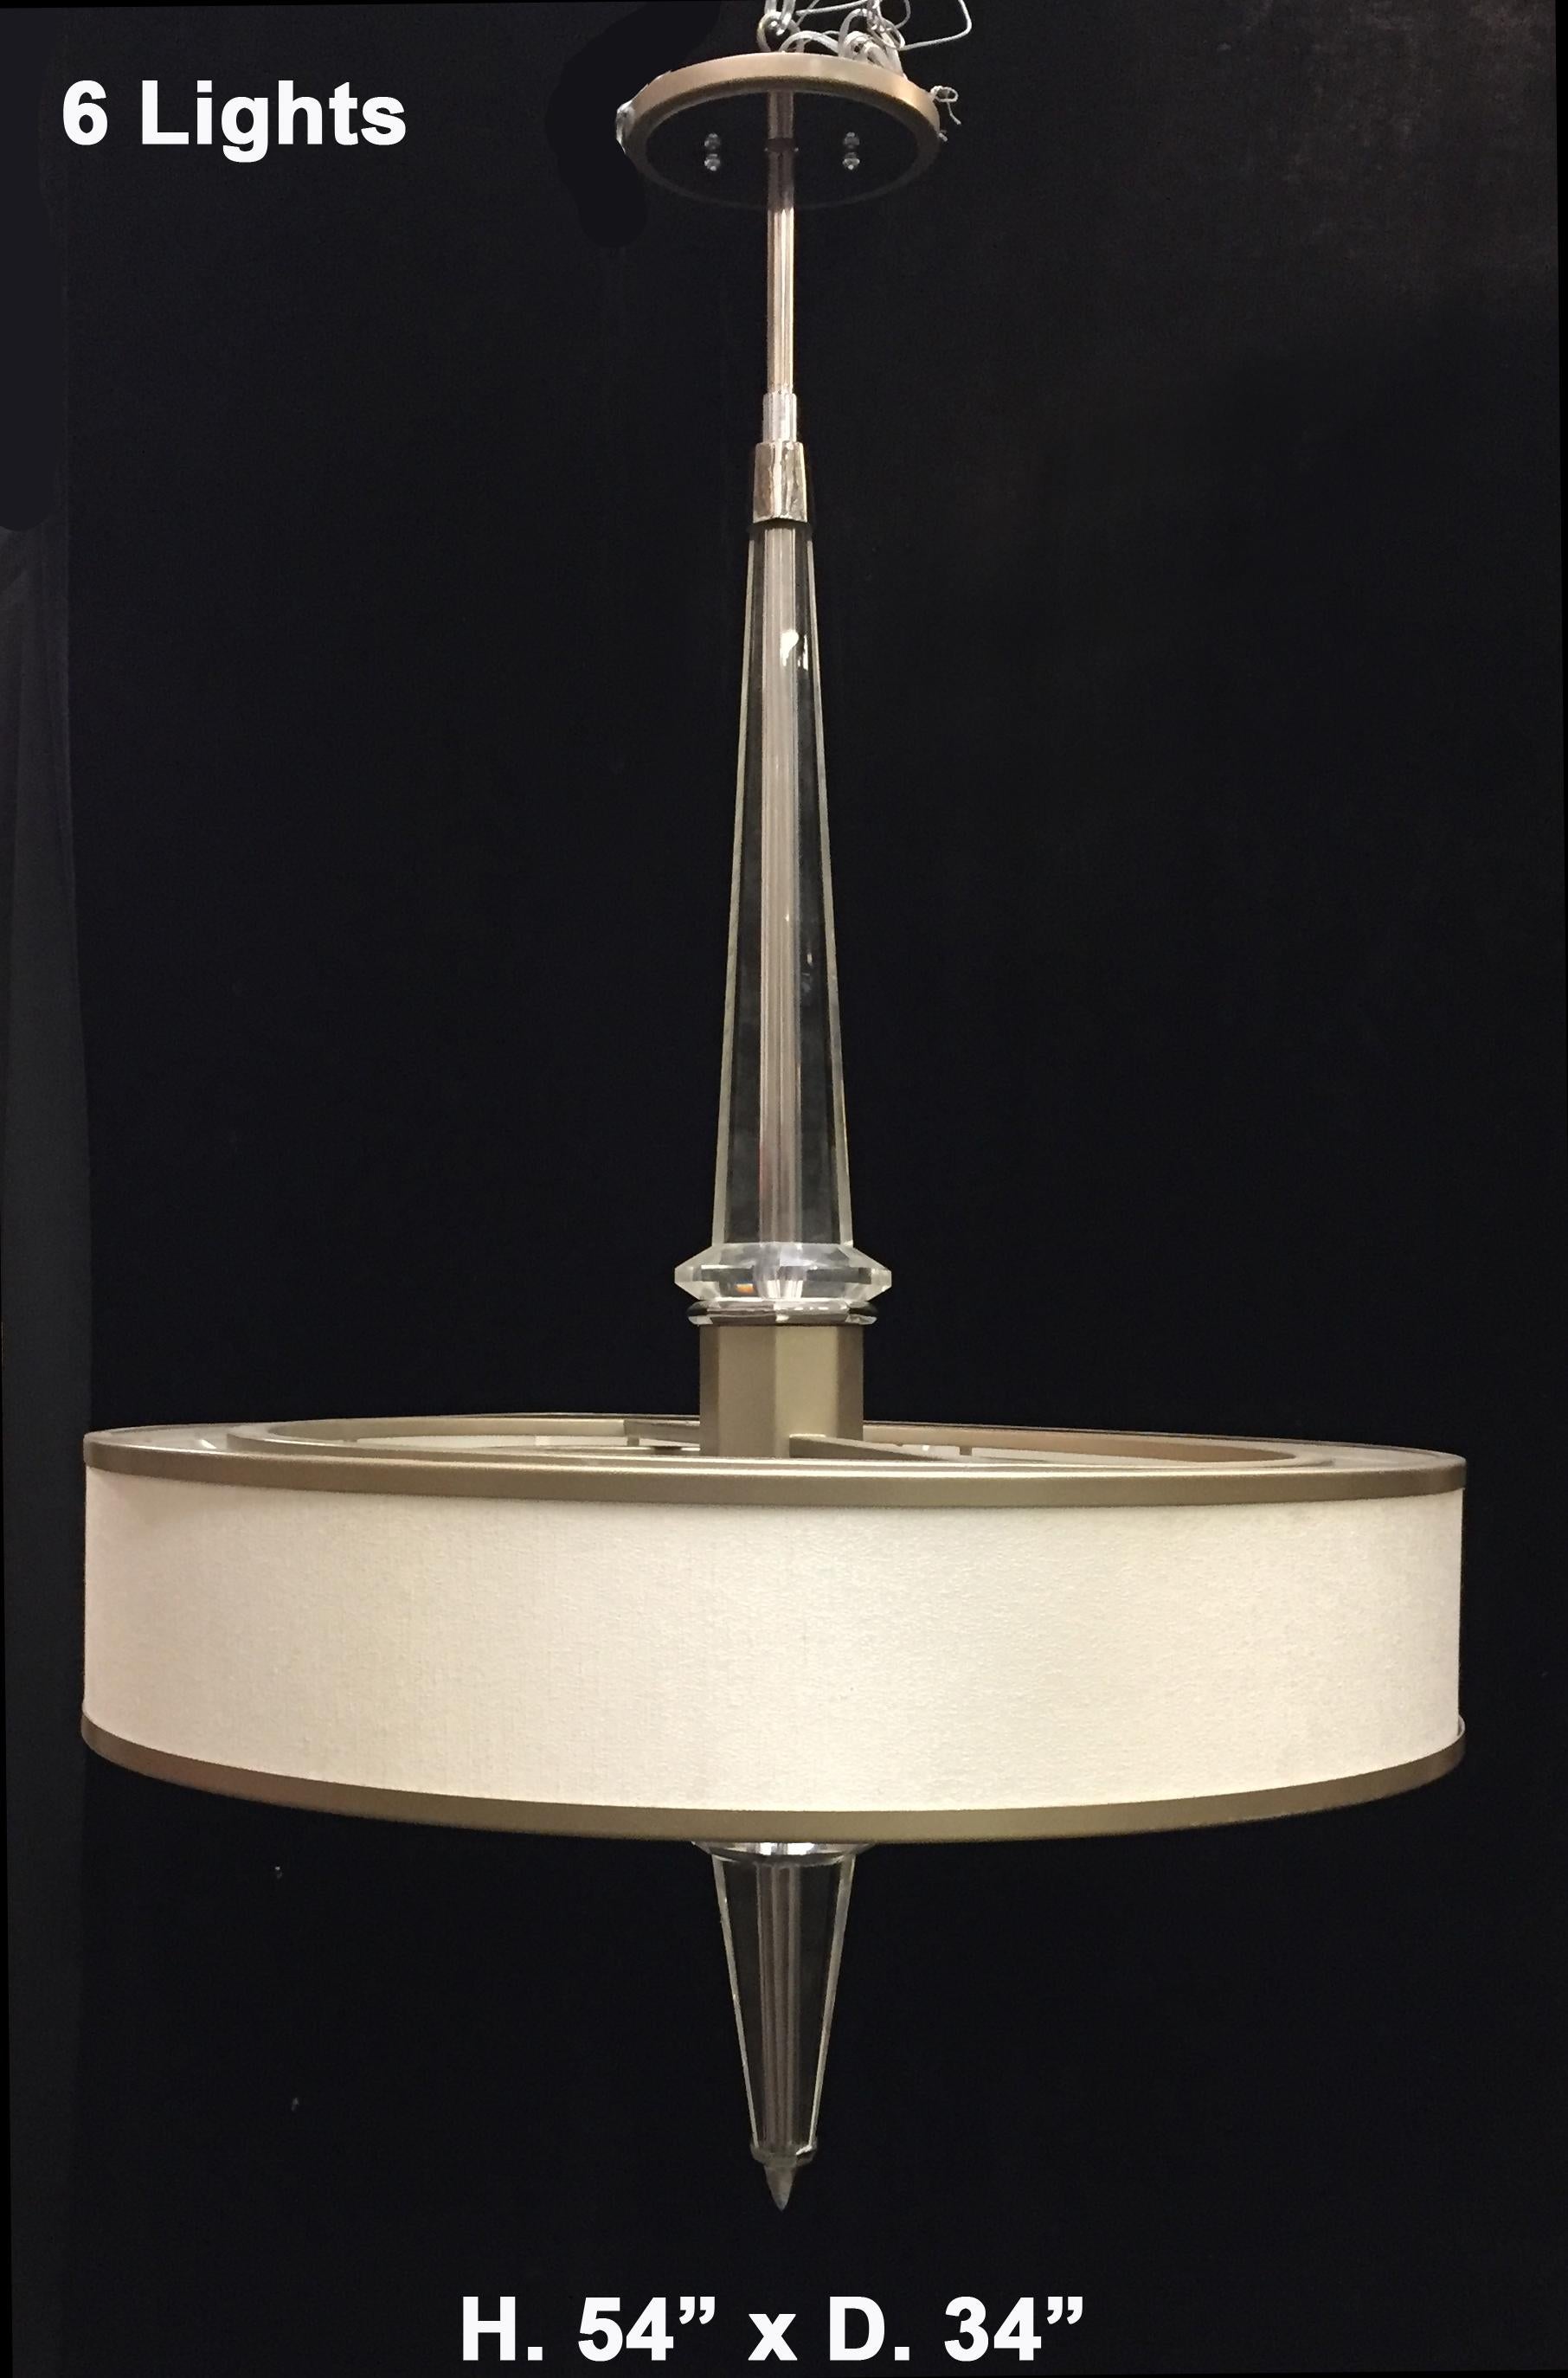 Lovely modern style lucite chandelier.
Late 20th century. 
The chandelier is centered by an obelisk-shaped faceted Lucite central shaft, surrounded with a round shade containing 6 lights
Electrified for the U.S. market. 
Measures: H. 54